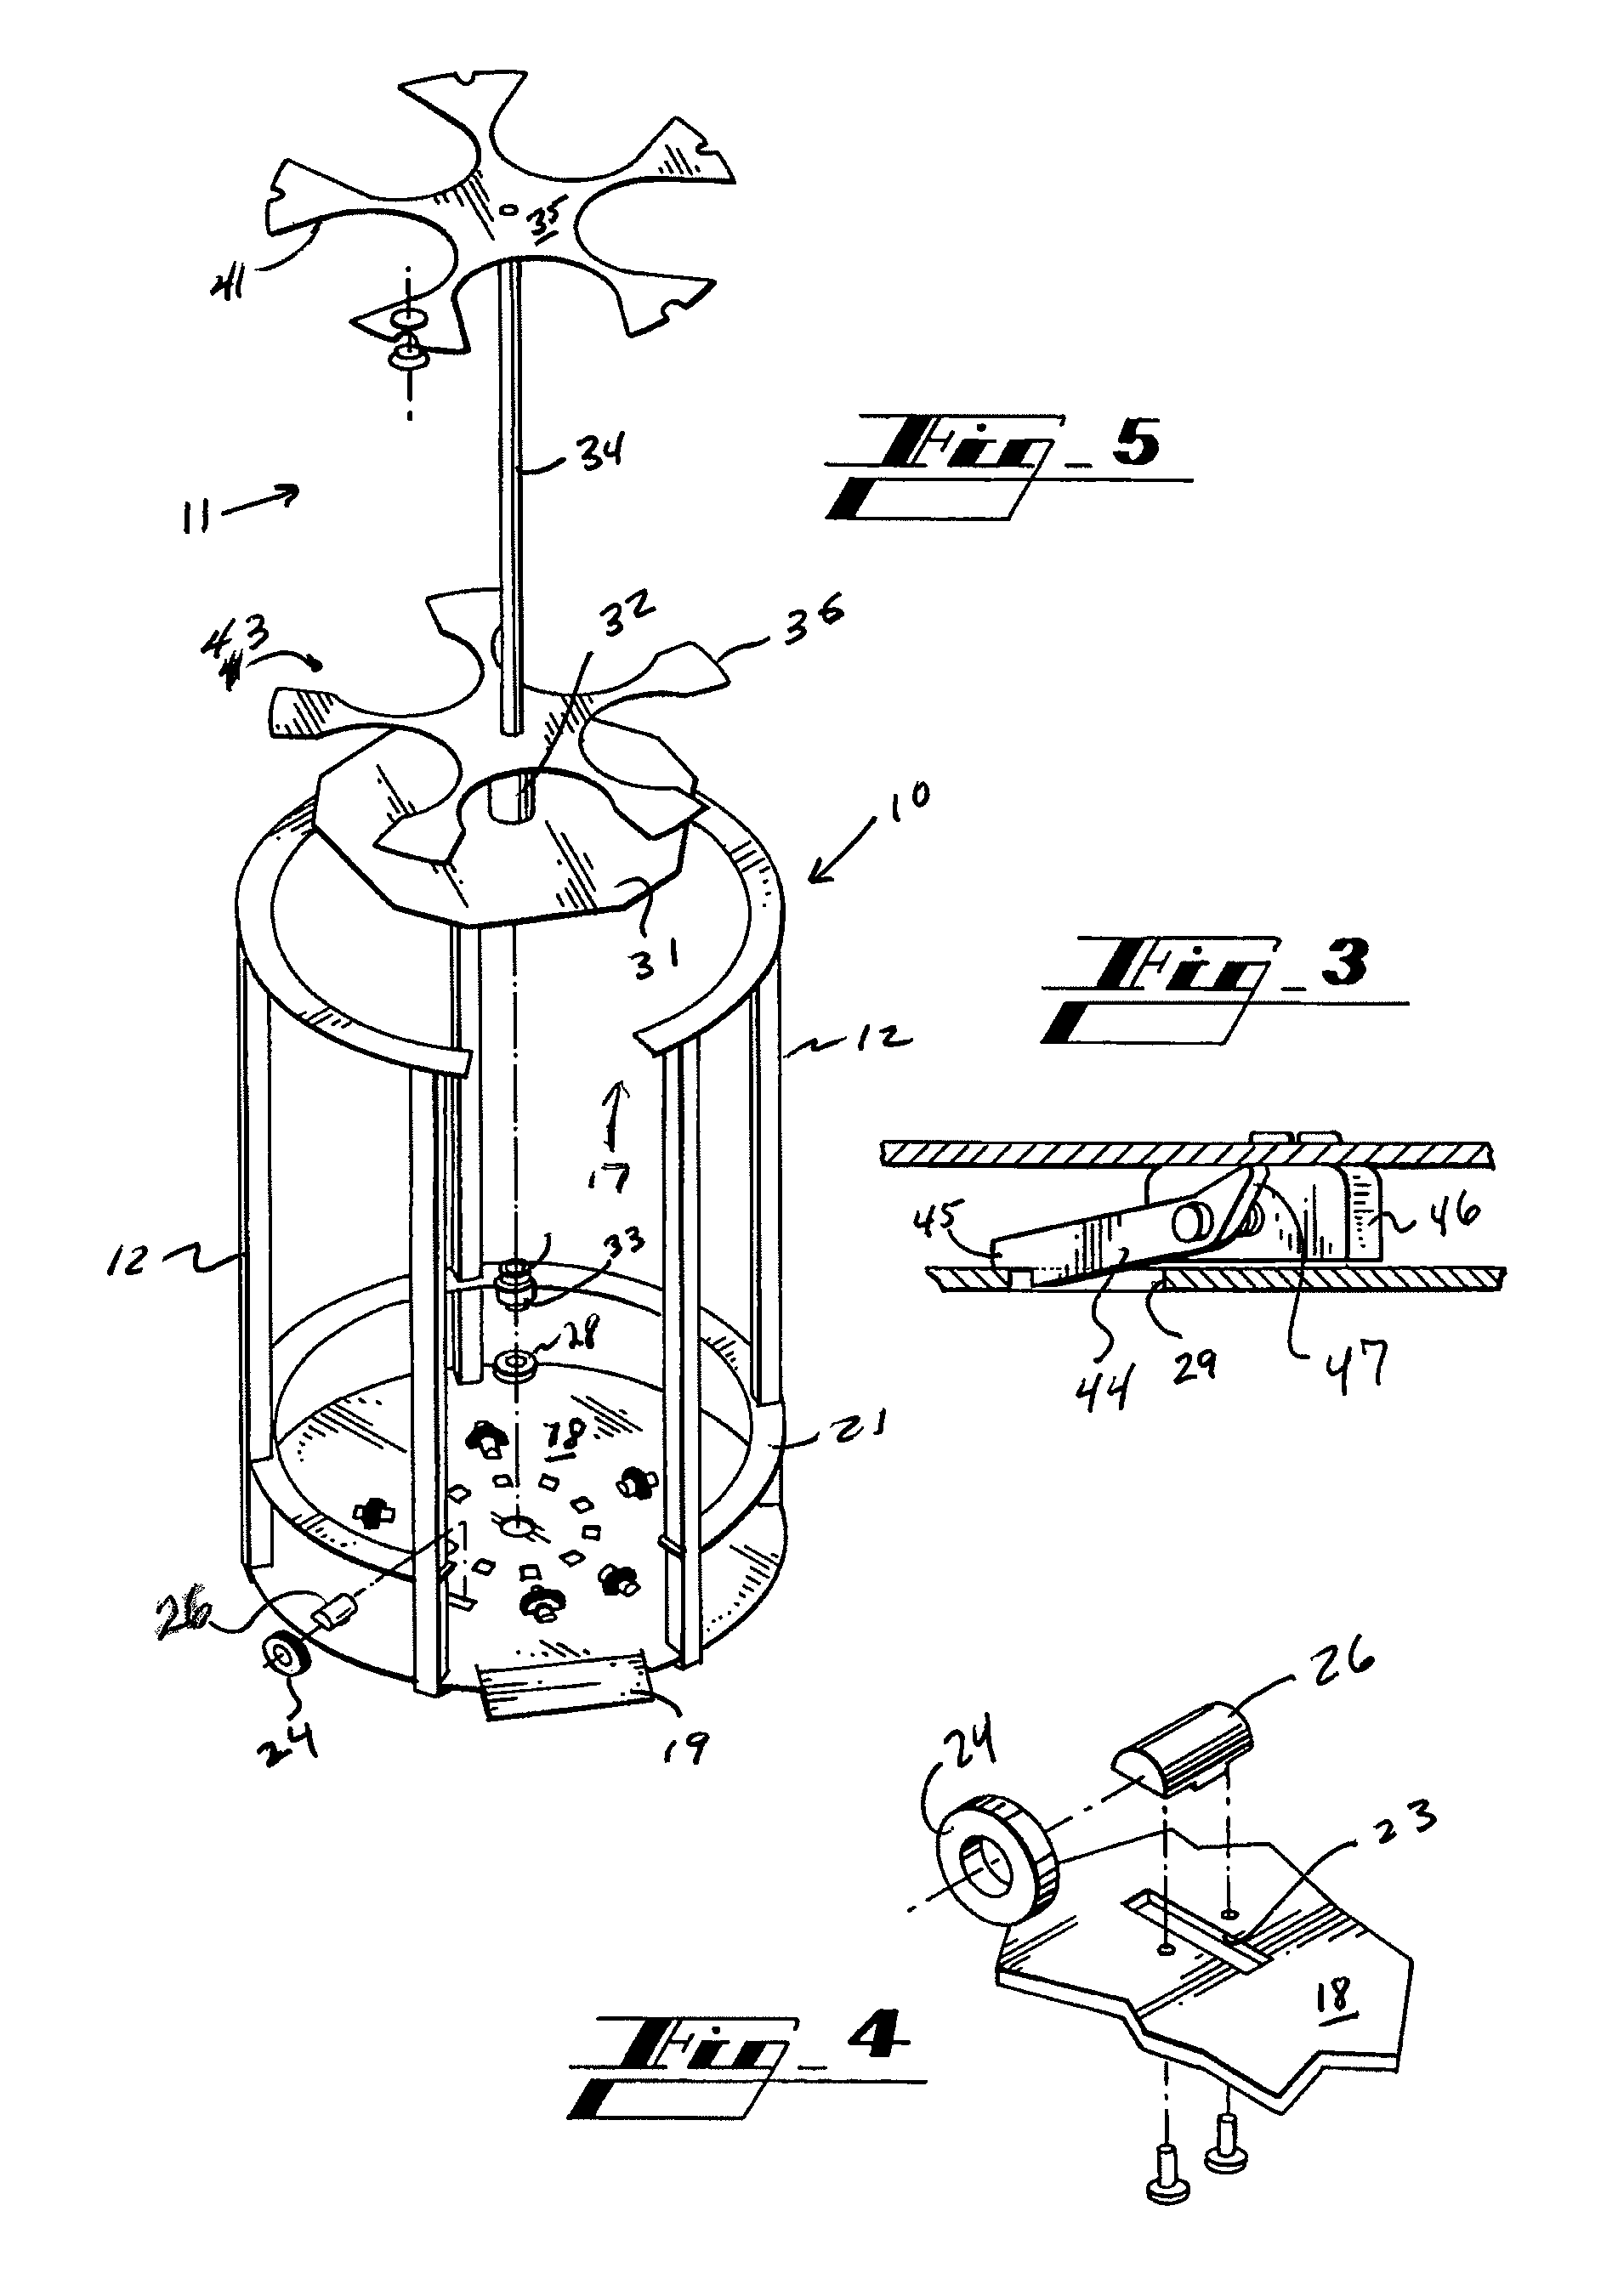 Method and apparatus for retaining gas cylinders